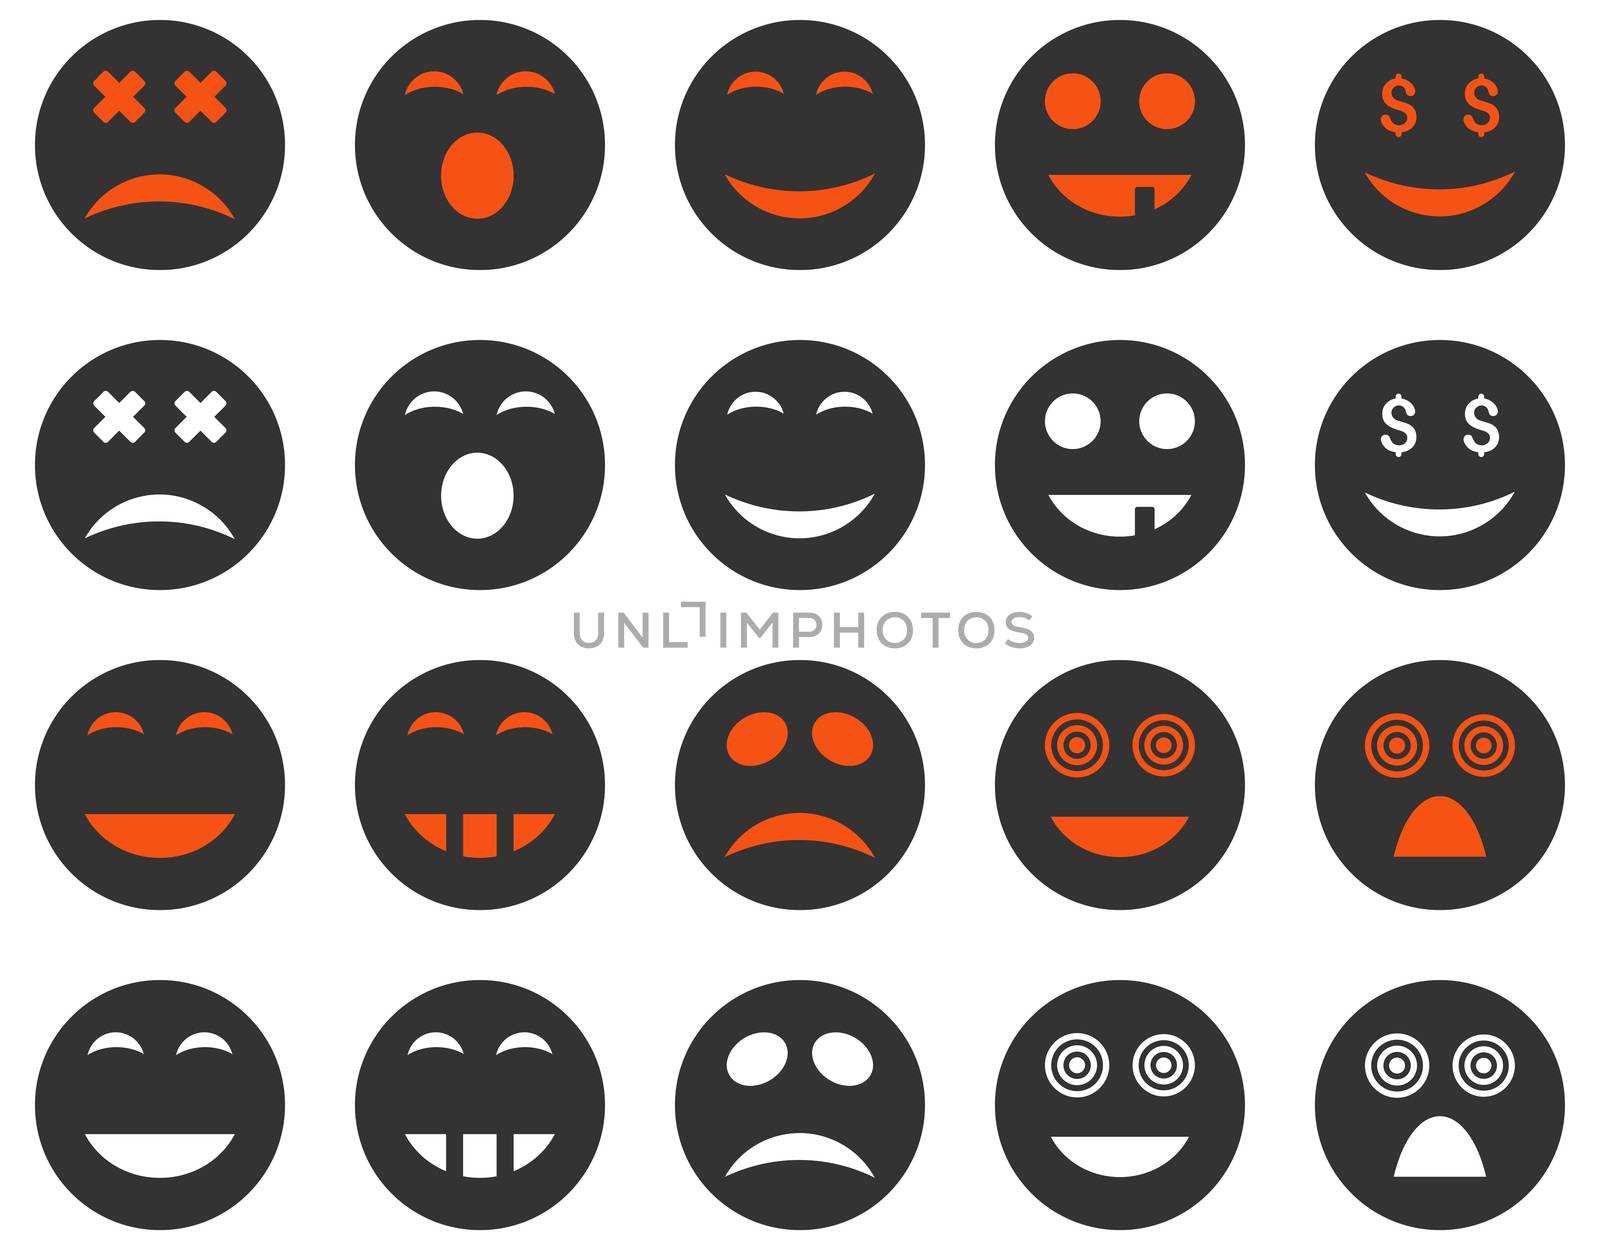 Smile and emotion icons. Glyph set style is bicolor flat images, orange and gray symbols, isolated on a white background.